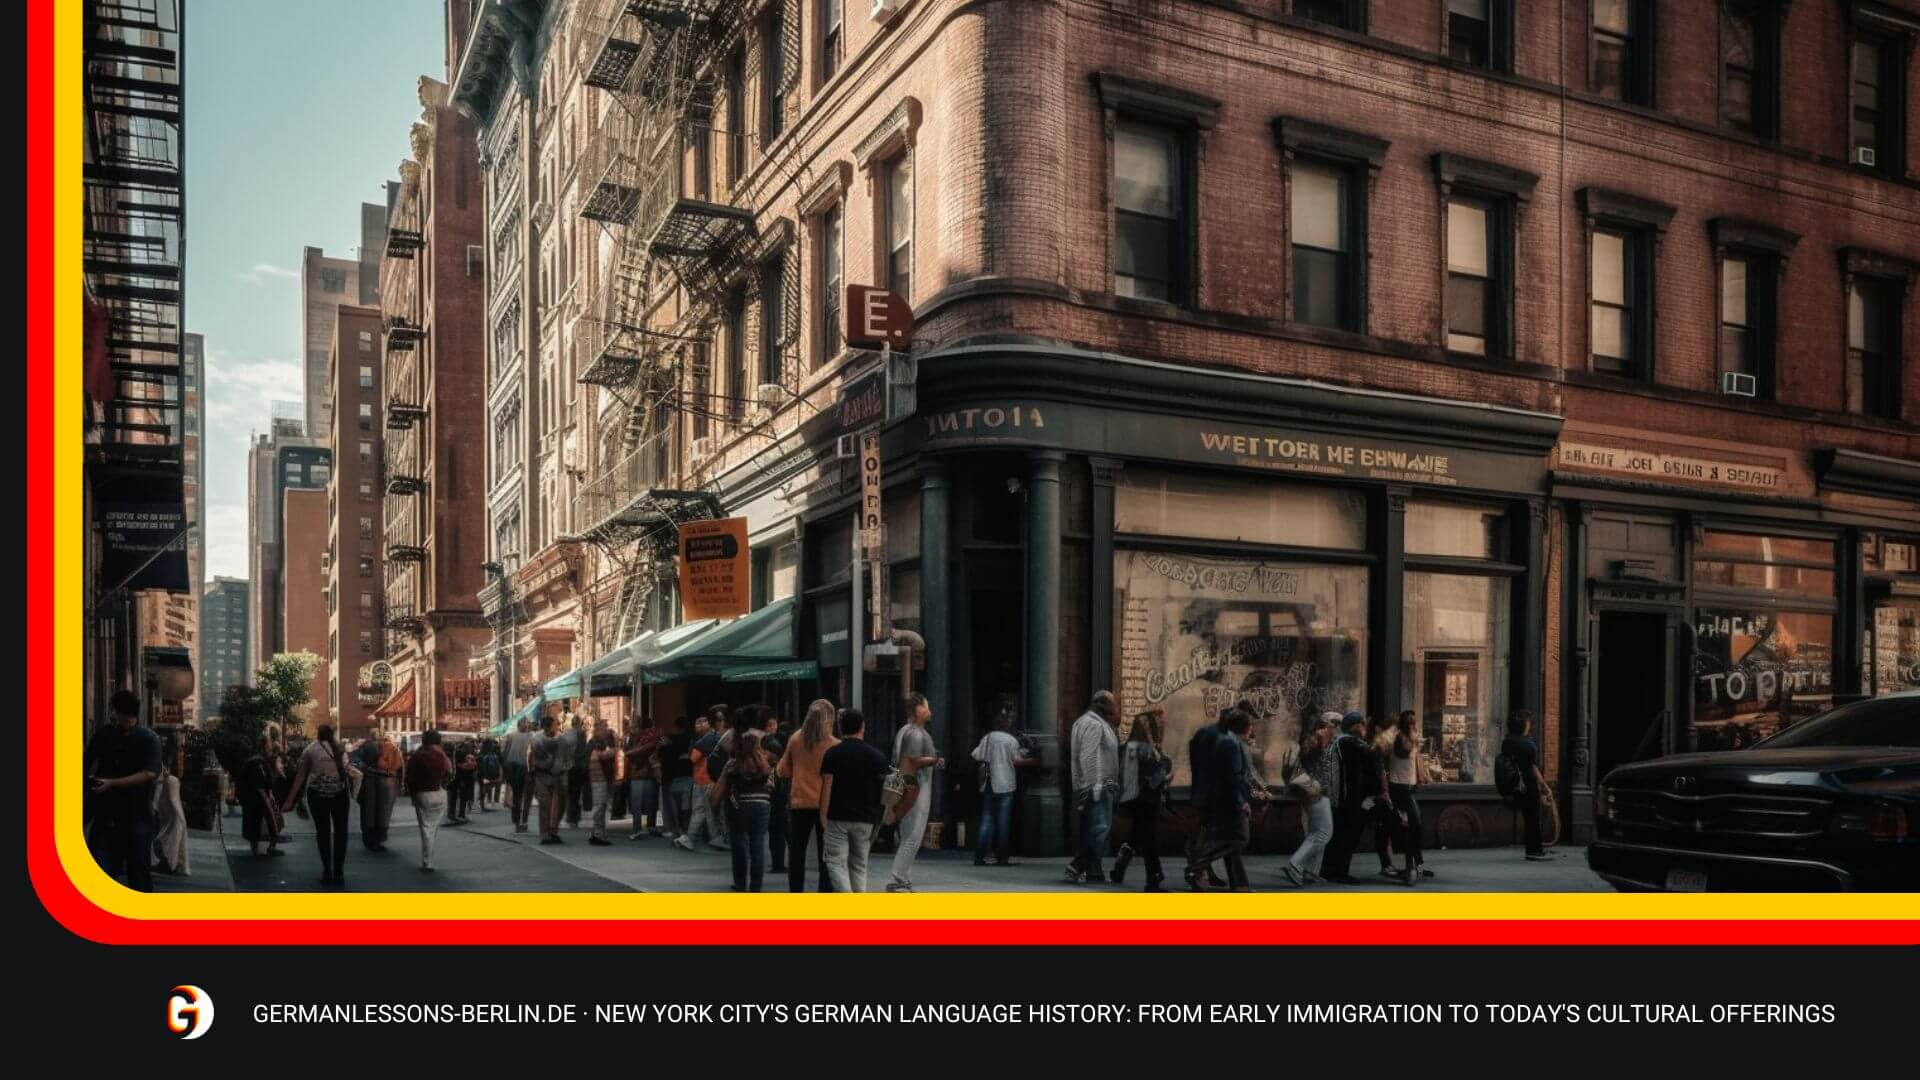 New York City's German Language History: From Early Immigration To Today's Cultural Offerings